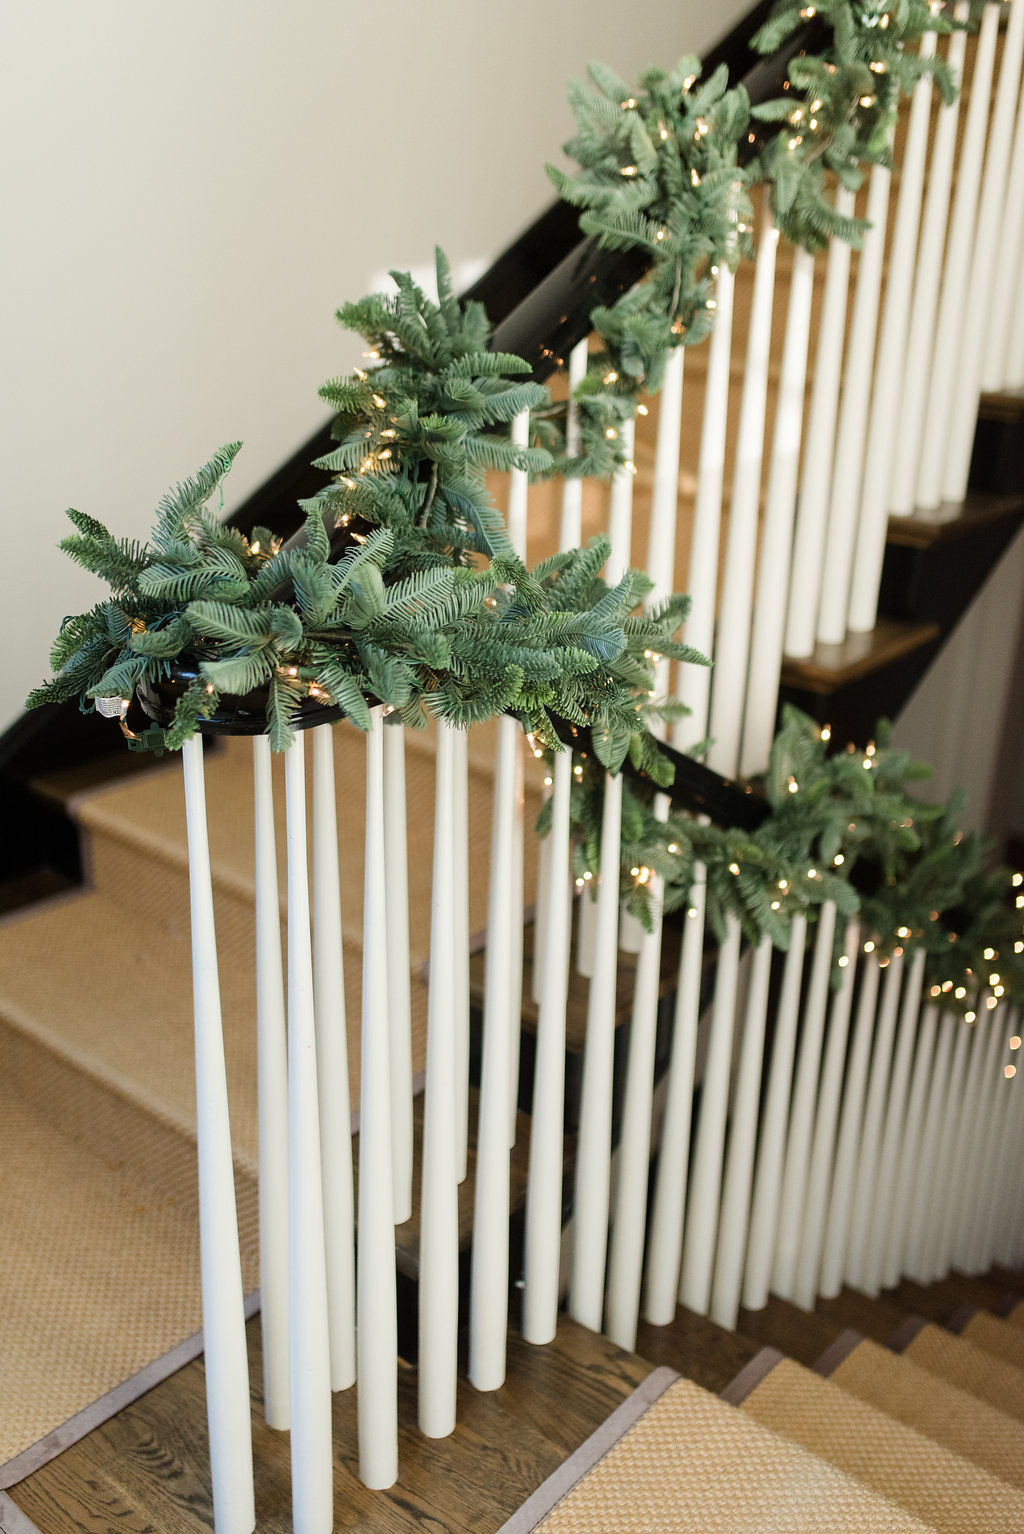 decorating with greenery